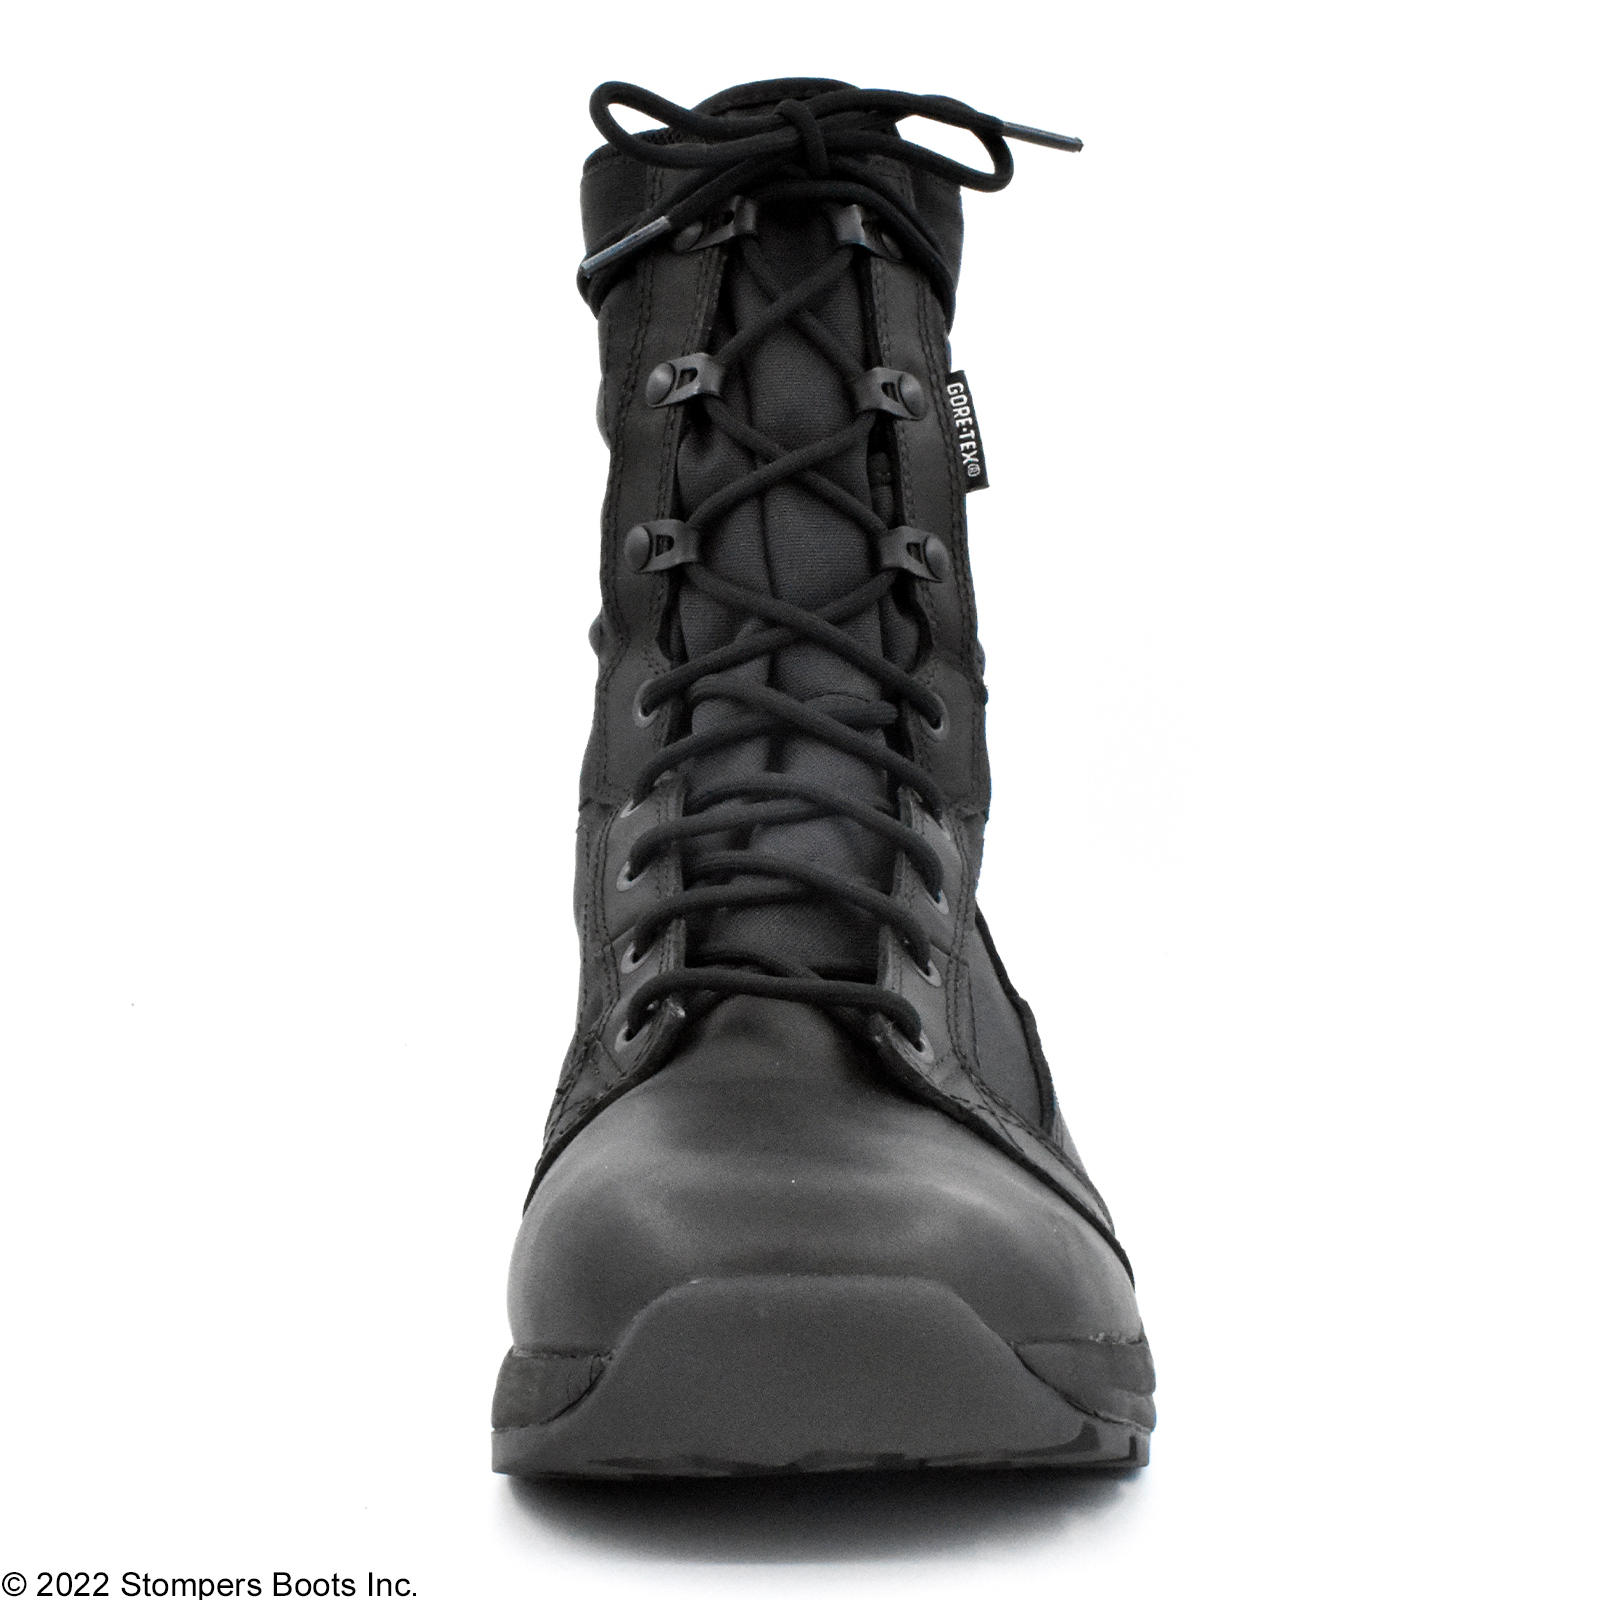 Danner Tachyon 8 Inch Black - Stompers Boots